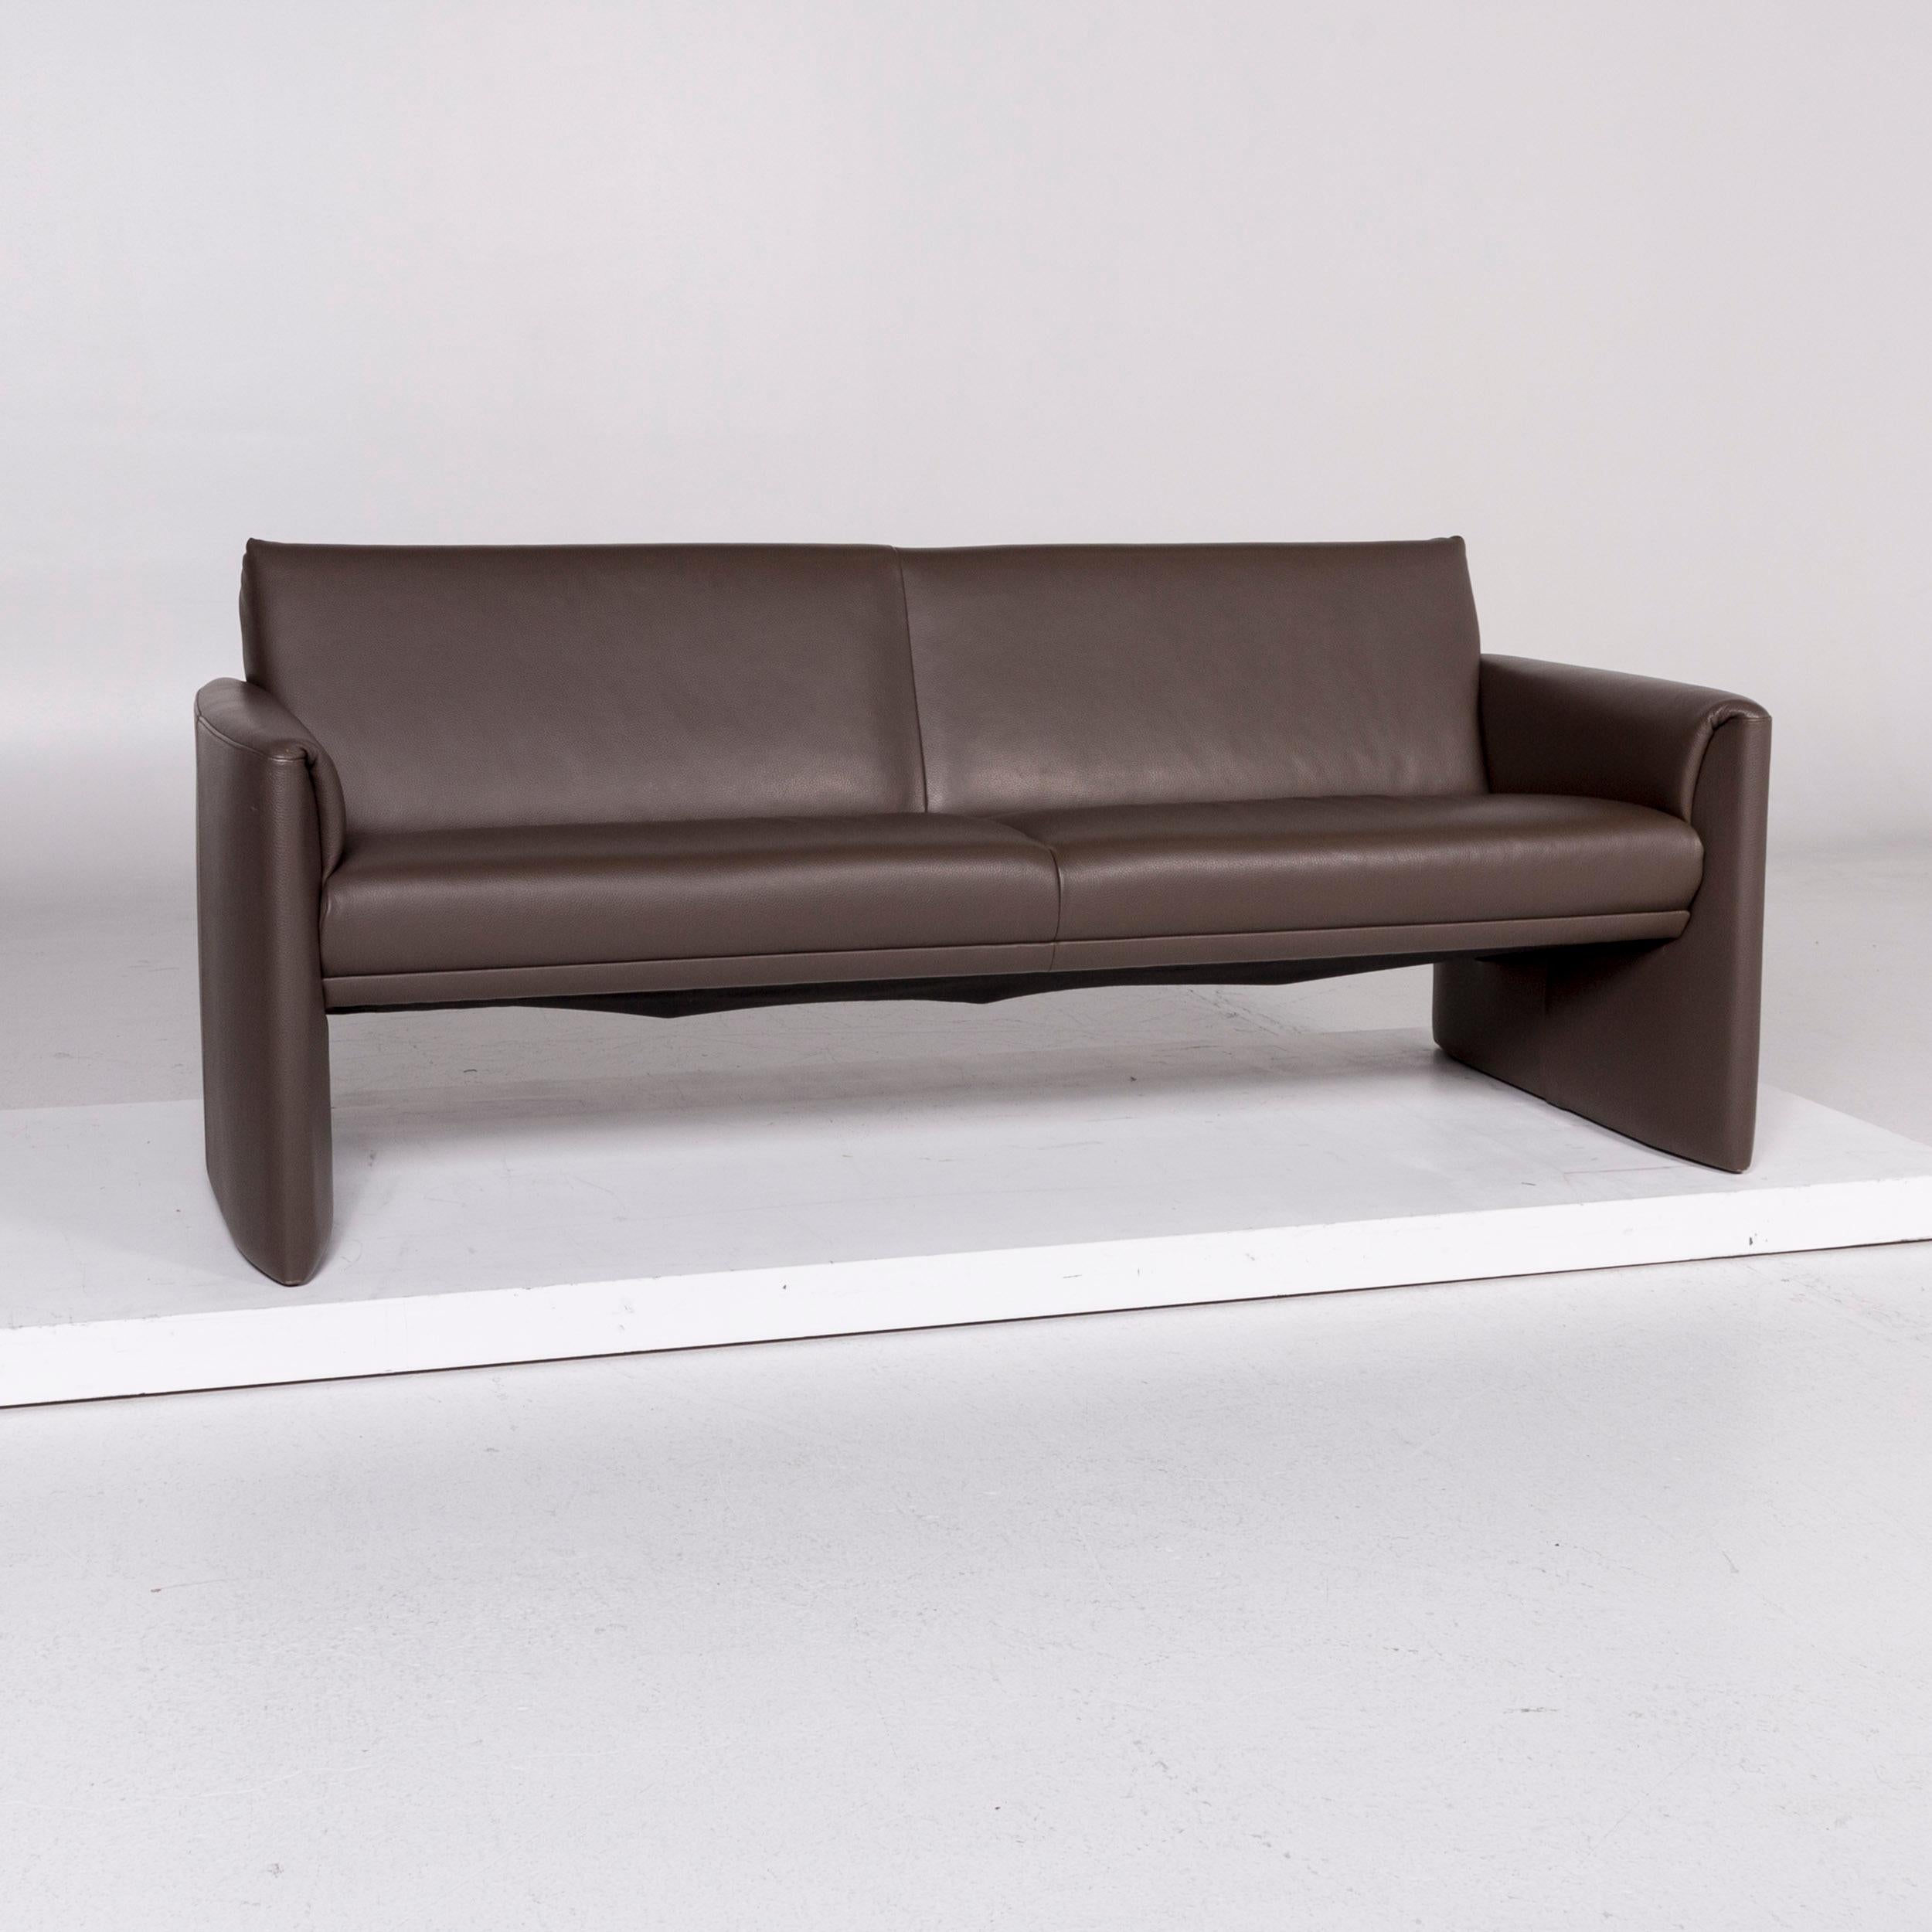 We bring to you a Leolux Boavista leather sofa brown three-seat couch.
 
 Product measurements in centimeters:
 
Depth 90
Width 195
Height 78
Seat-height 43
Rest-height 59
Seat-depth 54
Seat-width 172
Back-height 48.
 